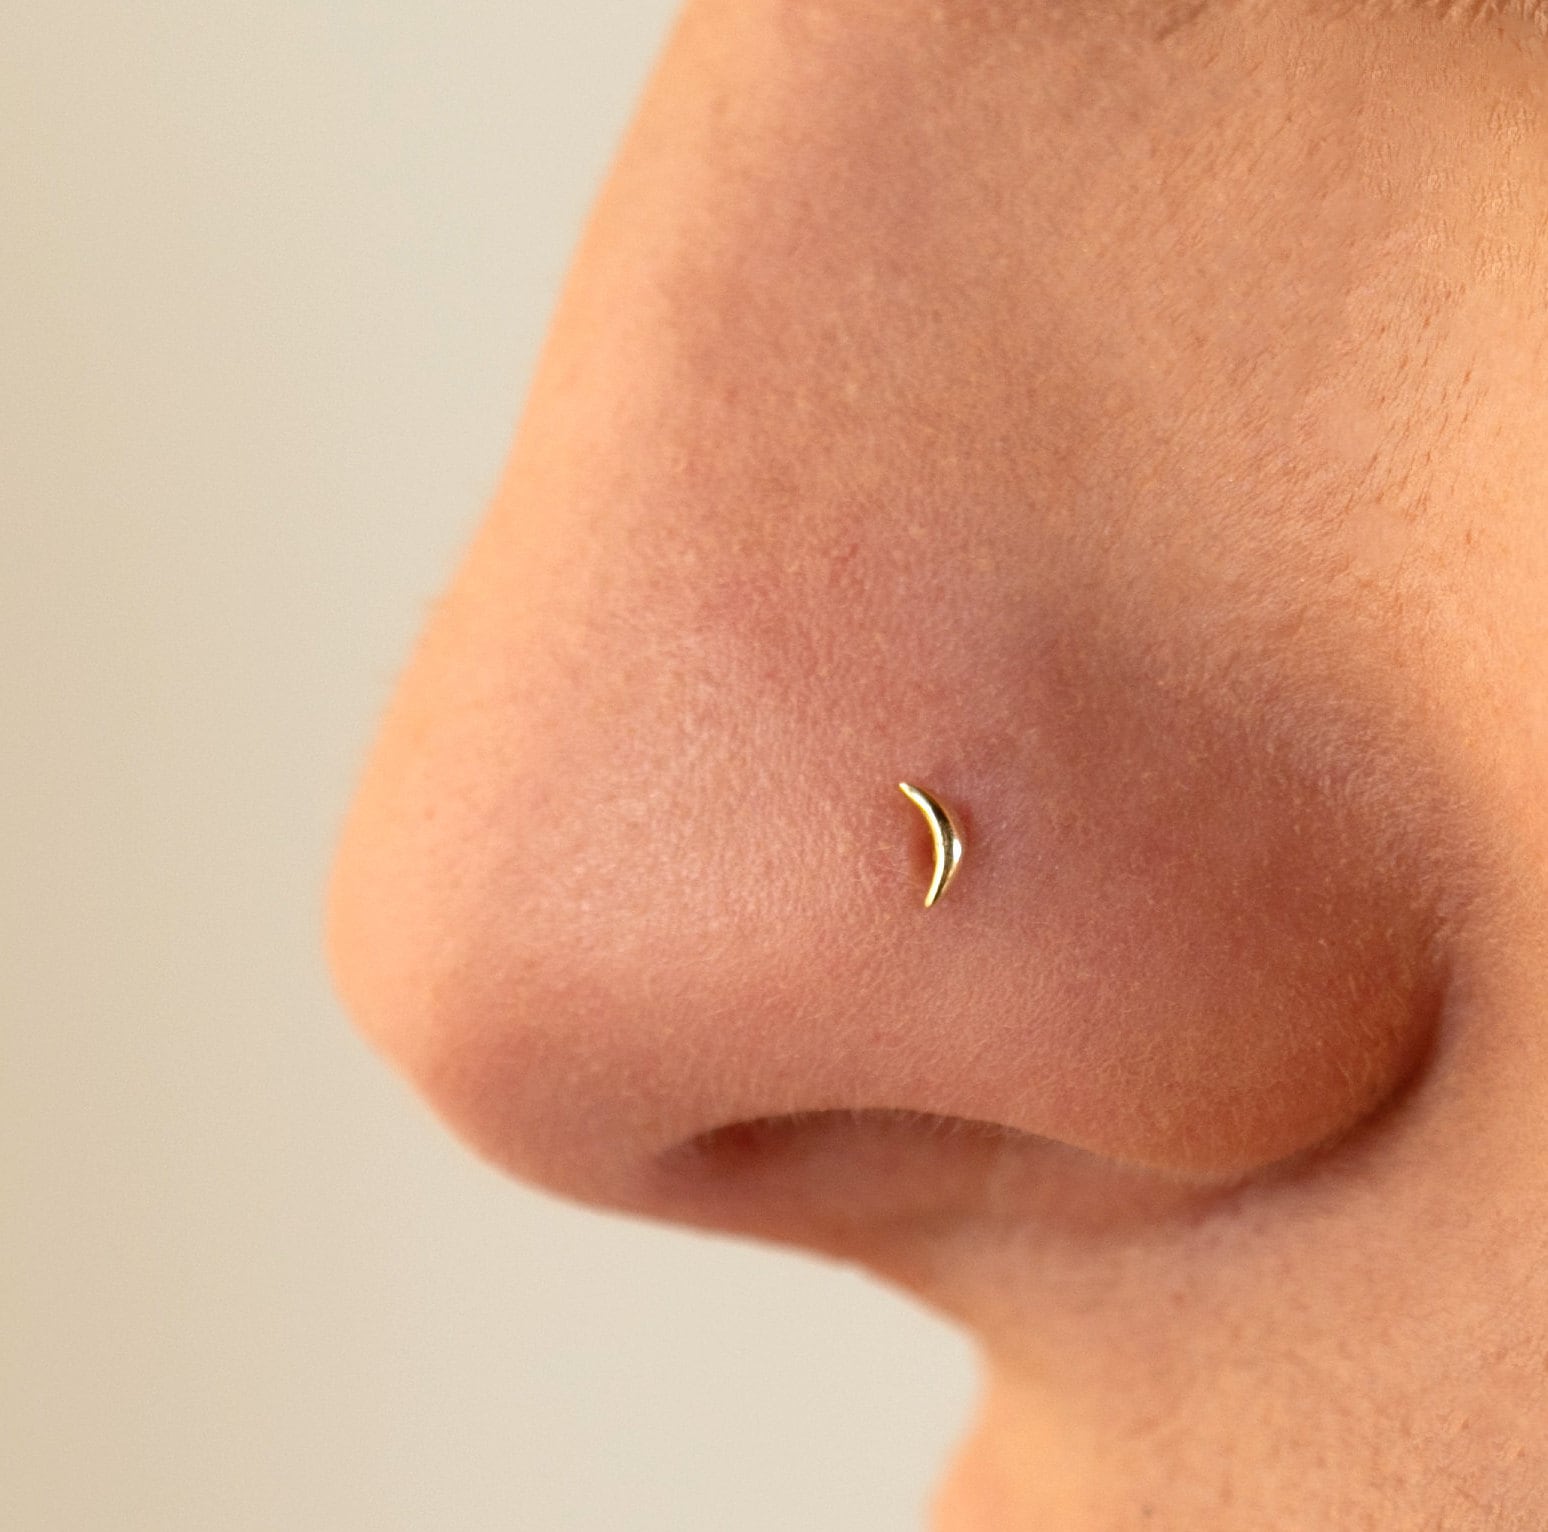 Buy Gold Nose Hoop, Gold Nose Ring, Tiny Nose Hoop, Tiny Nose Ring, CZ Nose  Hoop, Small Nose Hoop, Small CZ Nose Hoop, CZ Nose Ring, 14HP2 Online in  India - Etsy